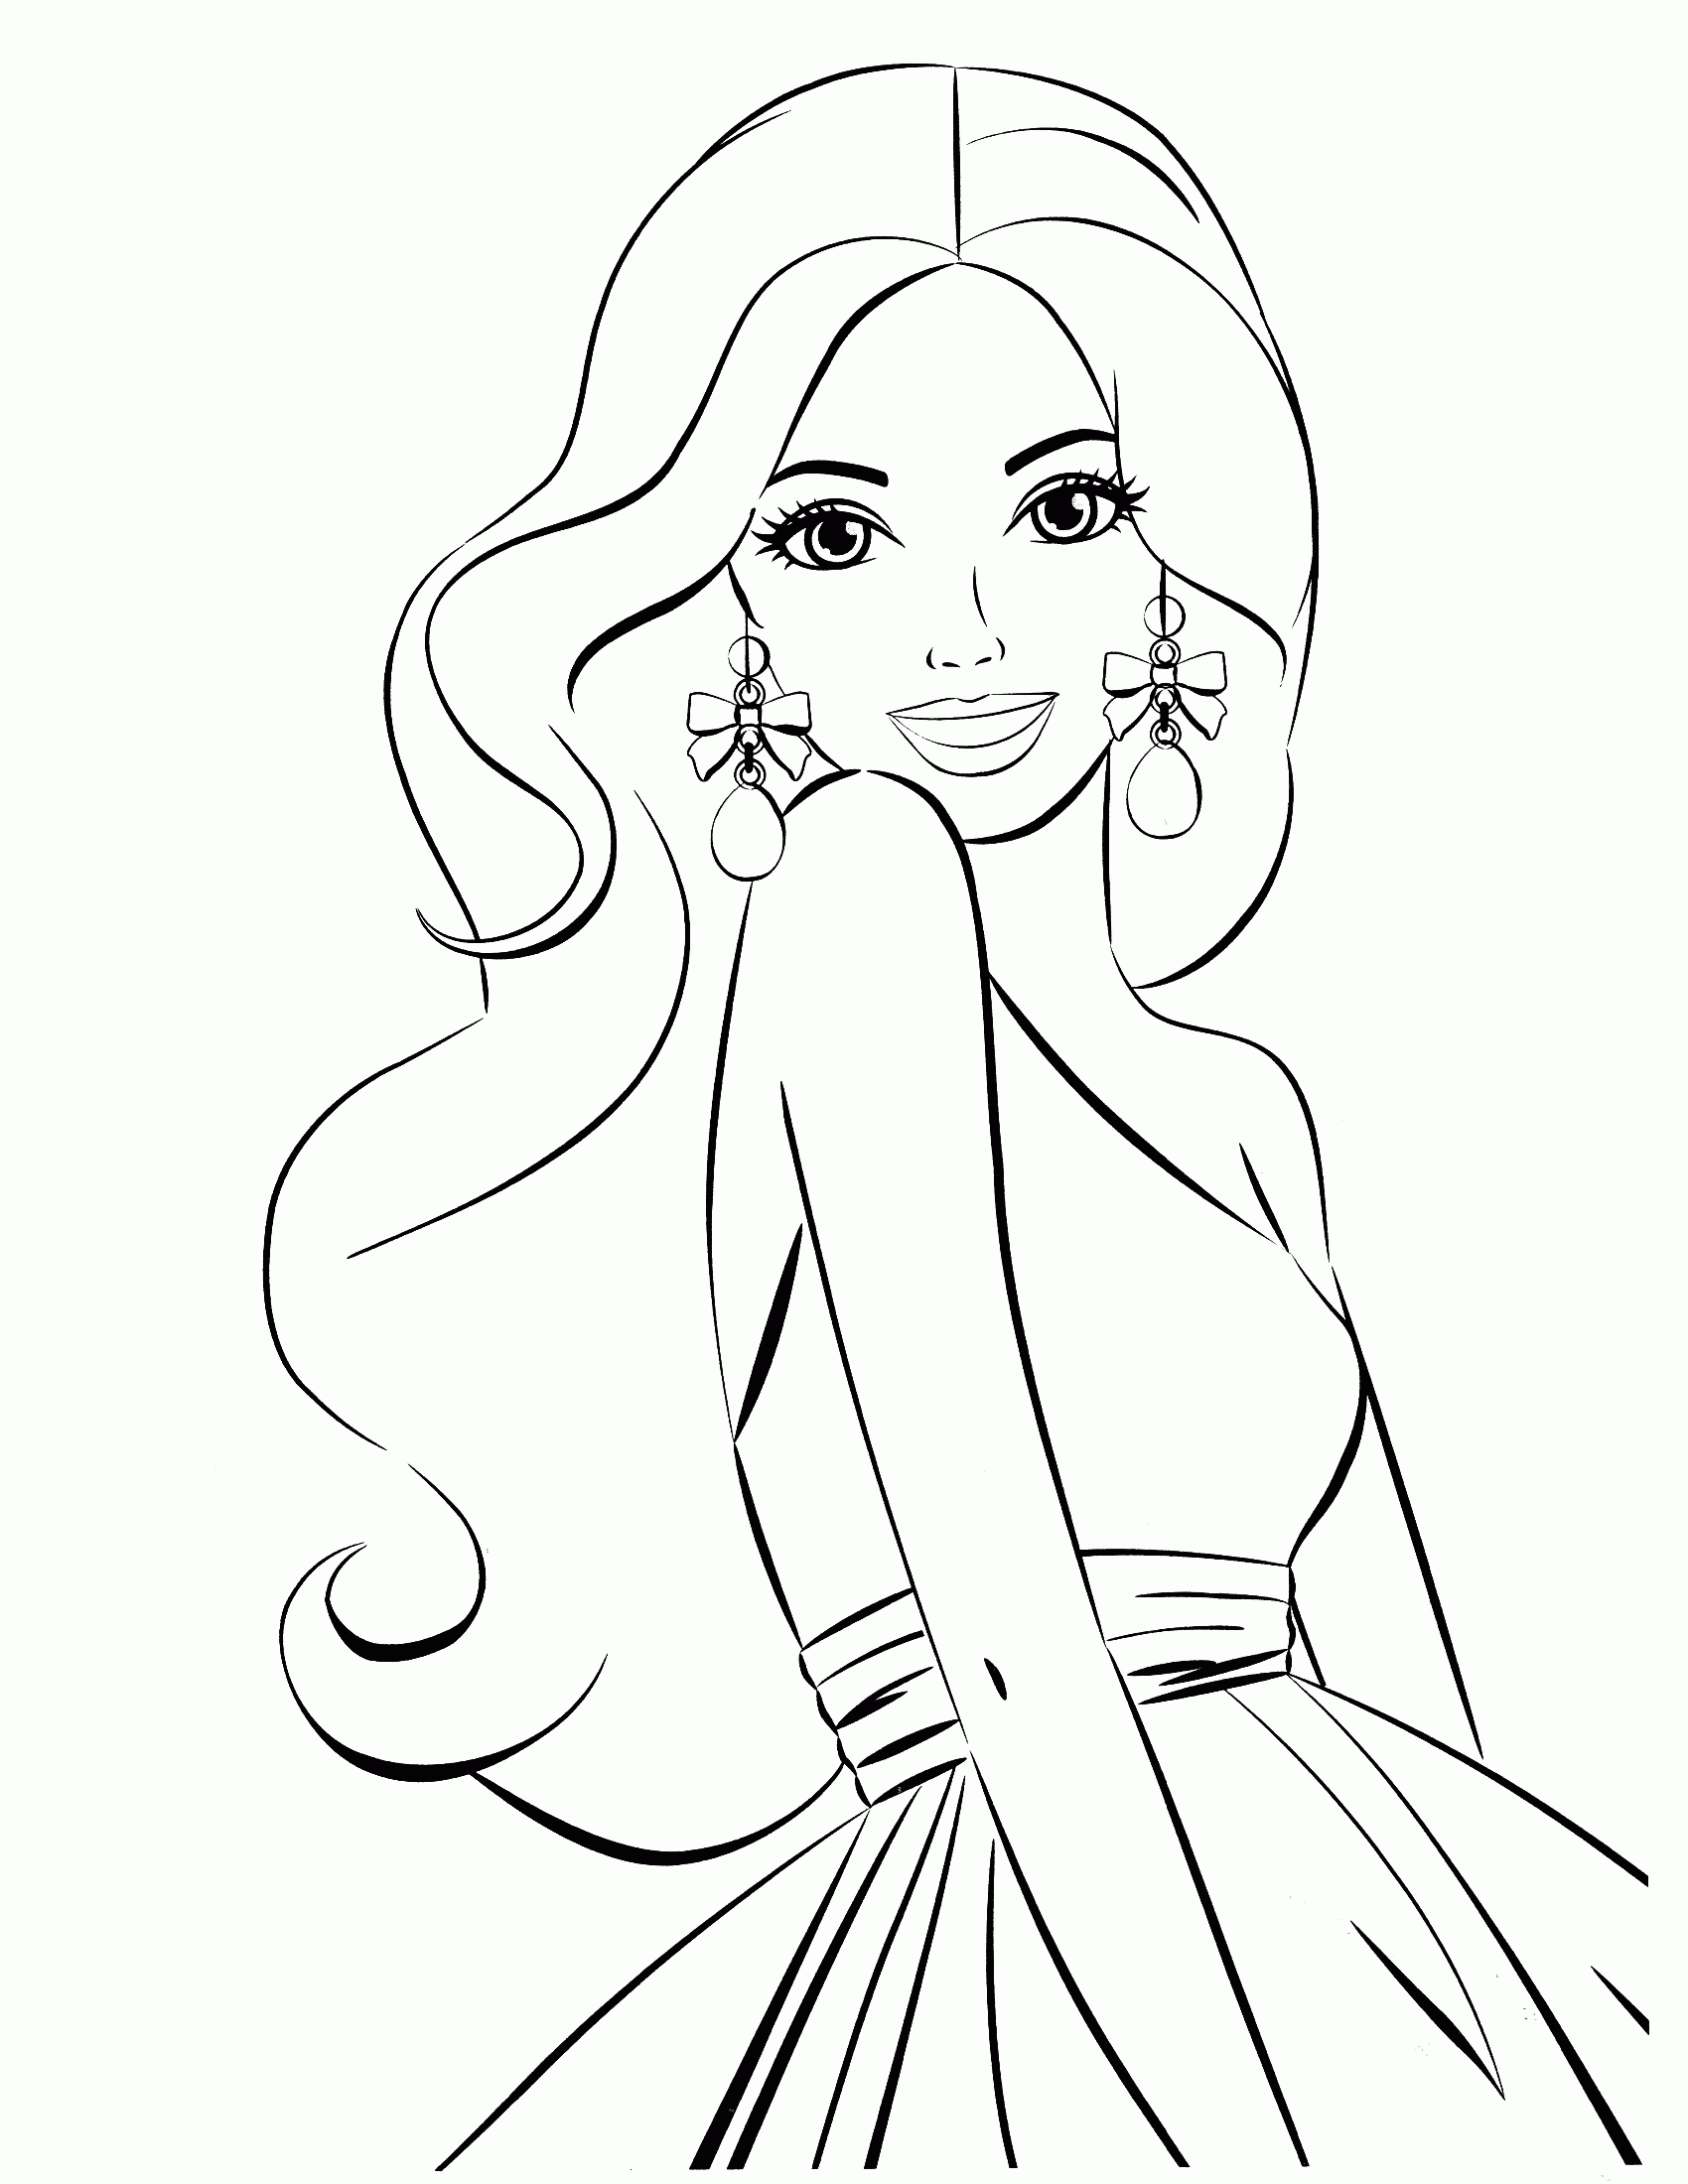 Image information image title : Free Barbie Coloring Pages Download Free Barbie Coloring Pages Png Images Free Cliparts On Clipart Library